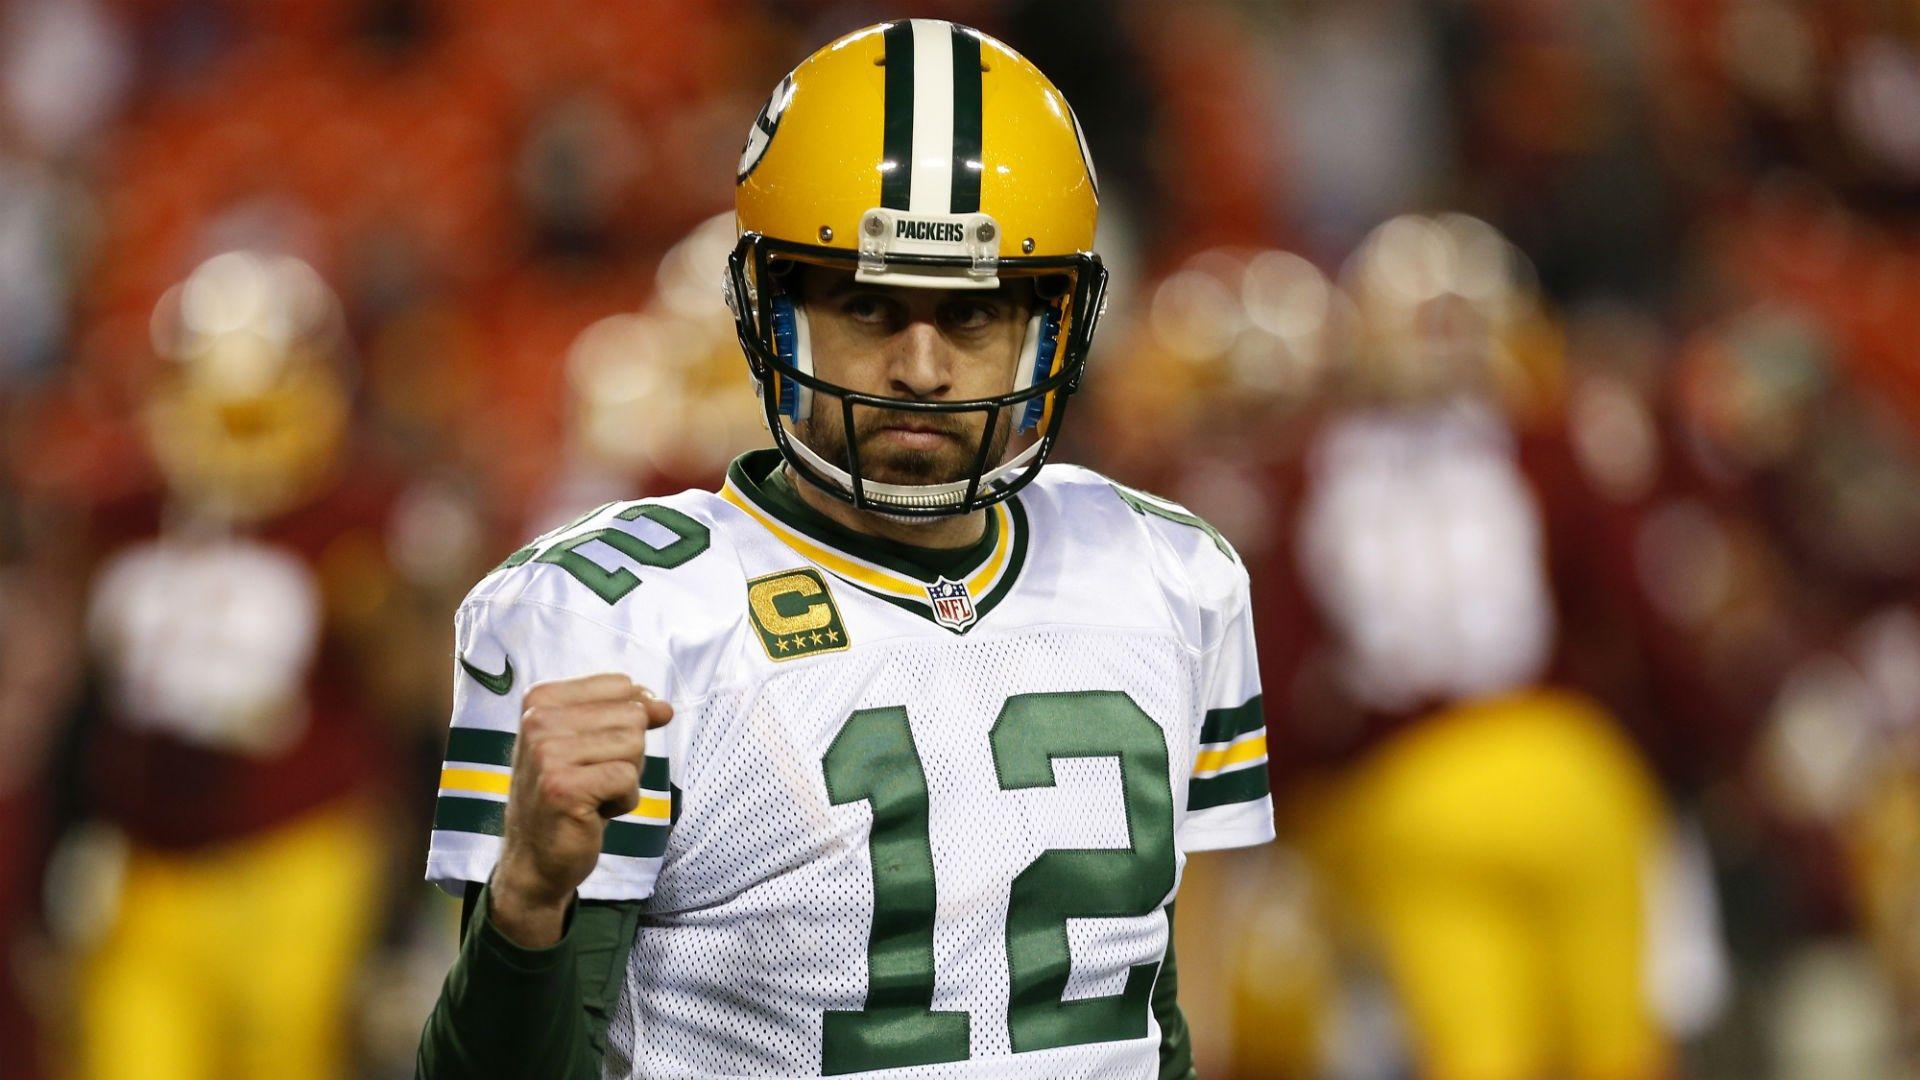 px aaron rodgers image 1080p high quality